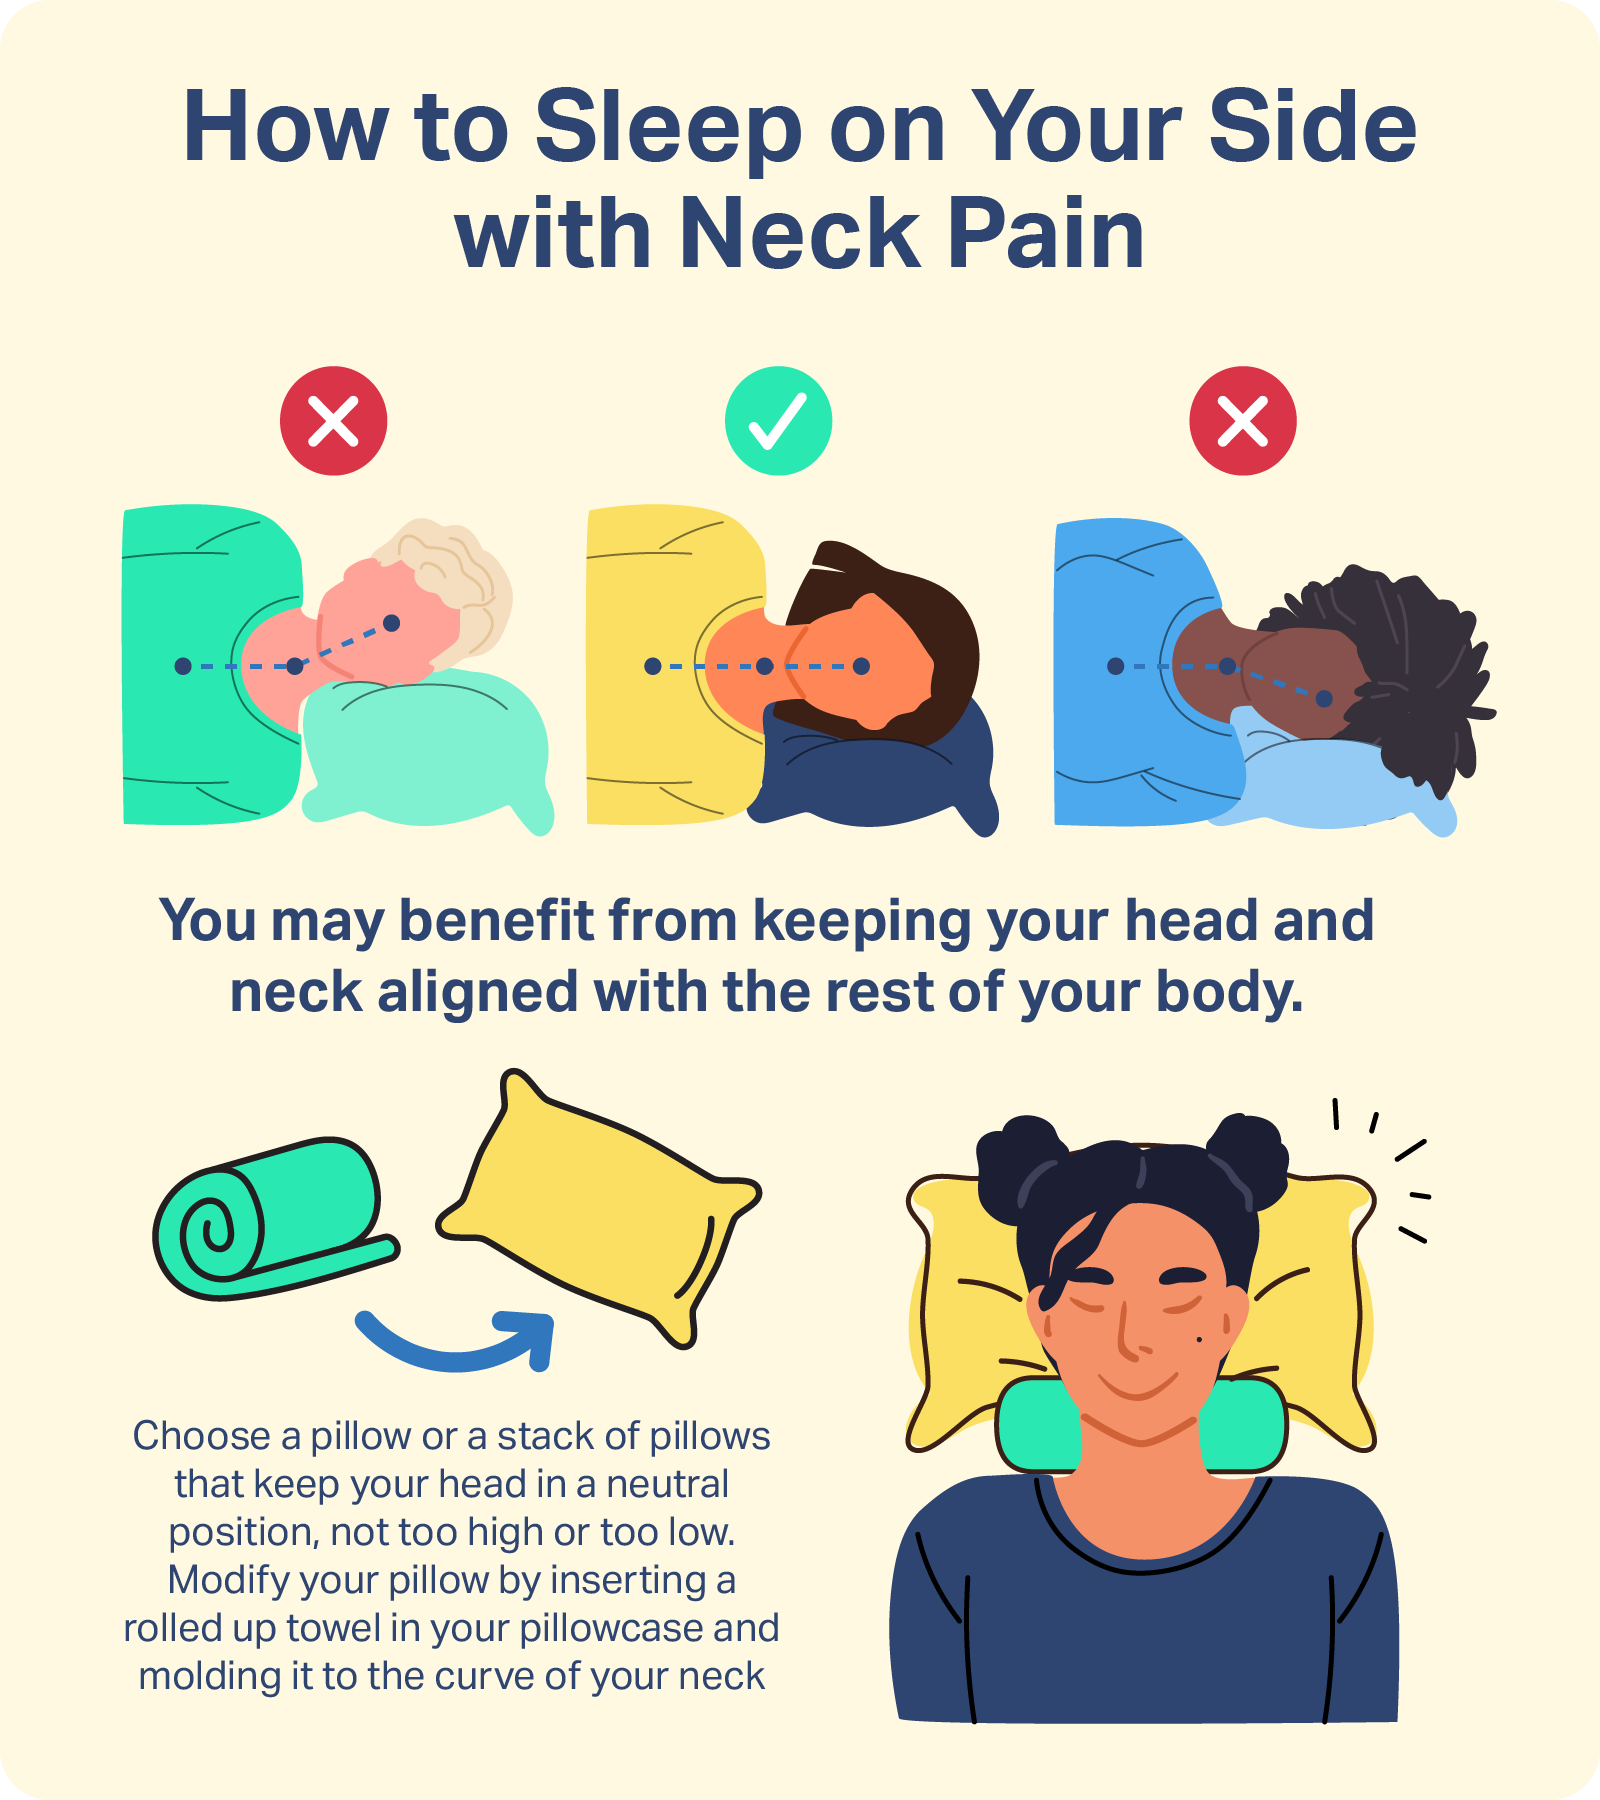 How To Choose The Best Sleeping Position For Neck Pain Sleep Foundation